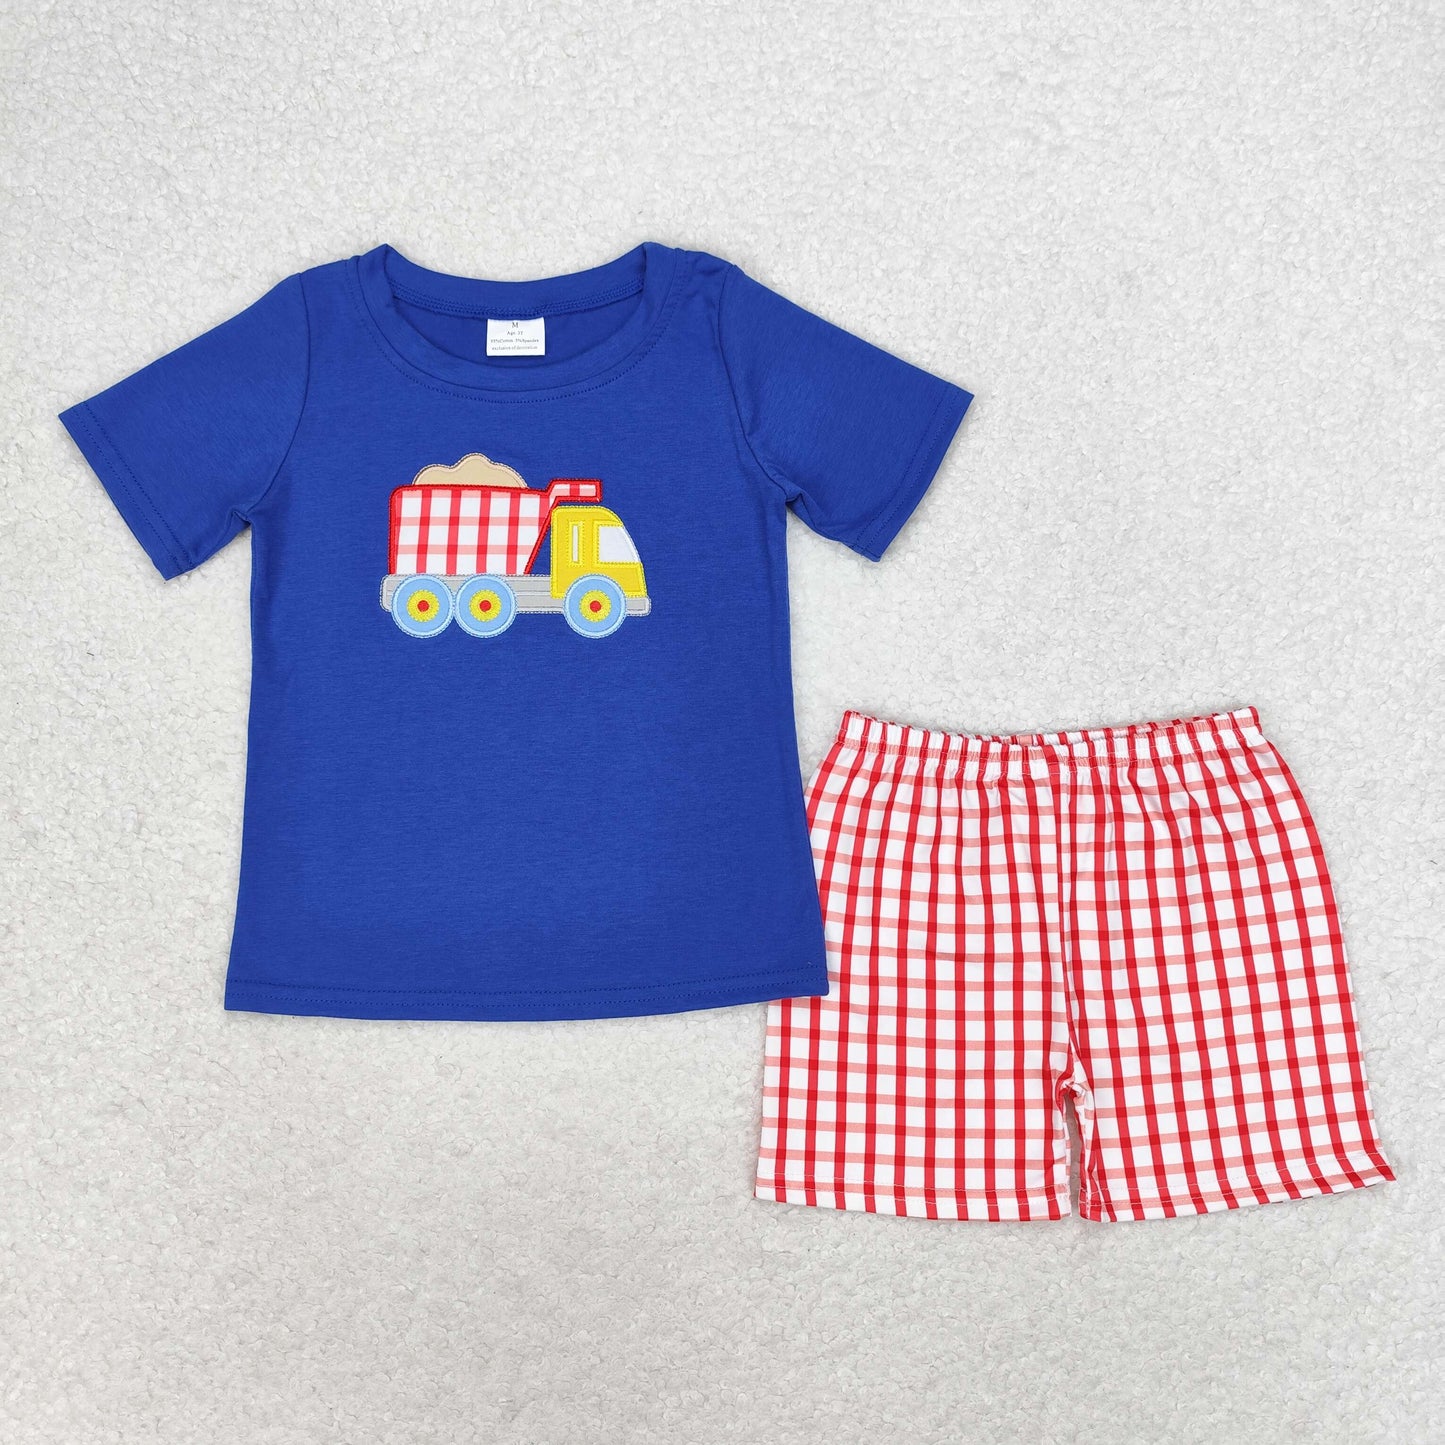 BSSO0857 Baby Boys Red Checkered Dump Truck Shirt Top Shorts Clothes Sets